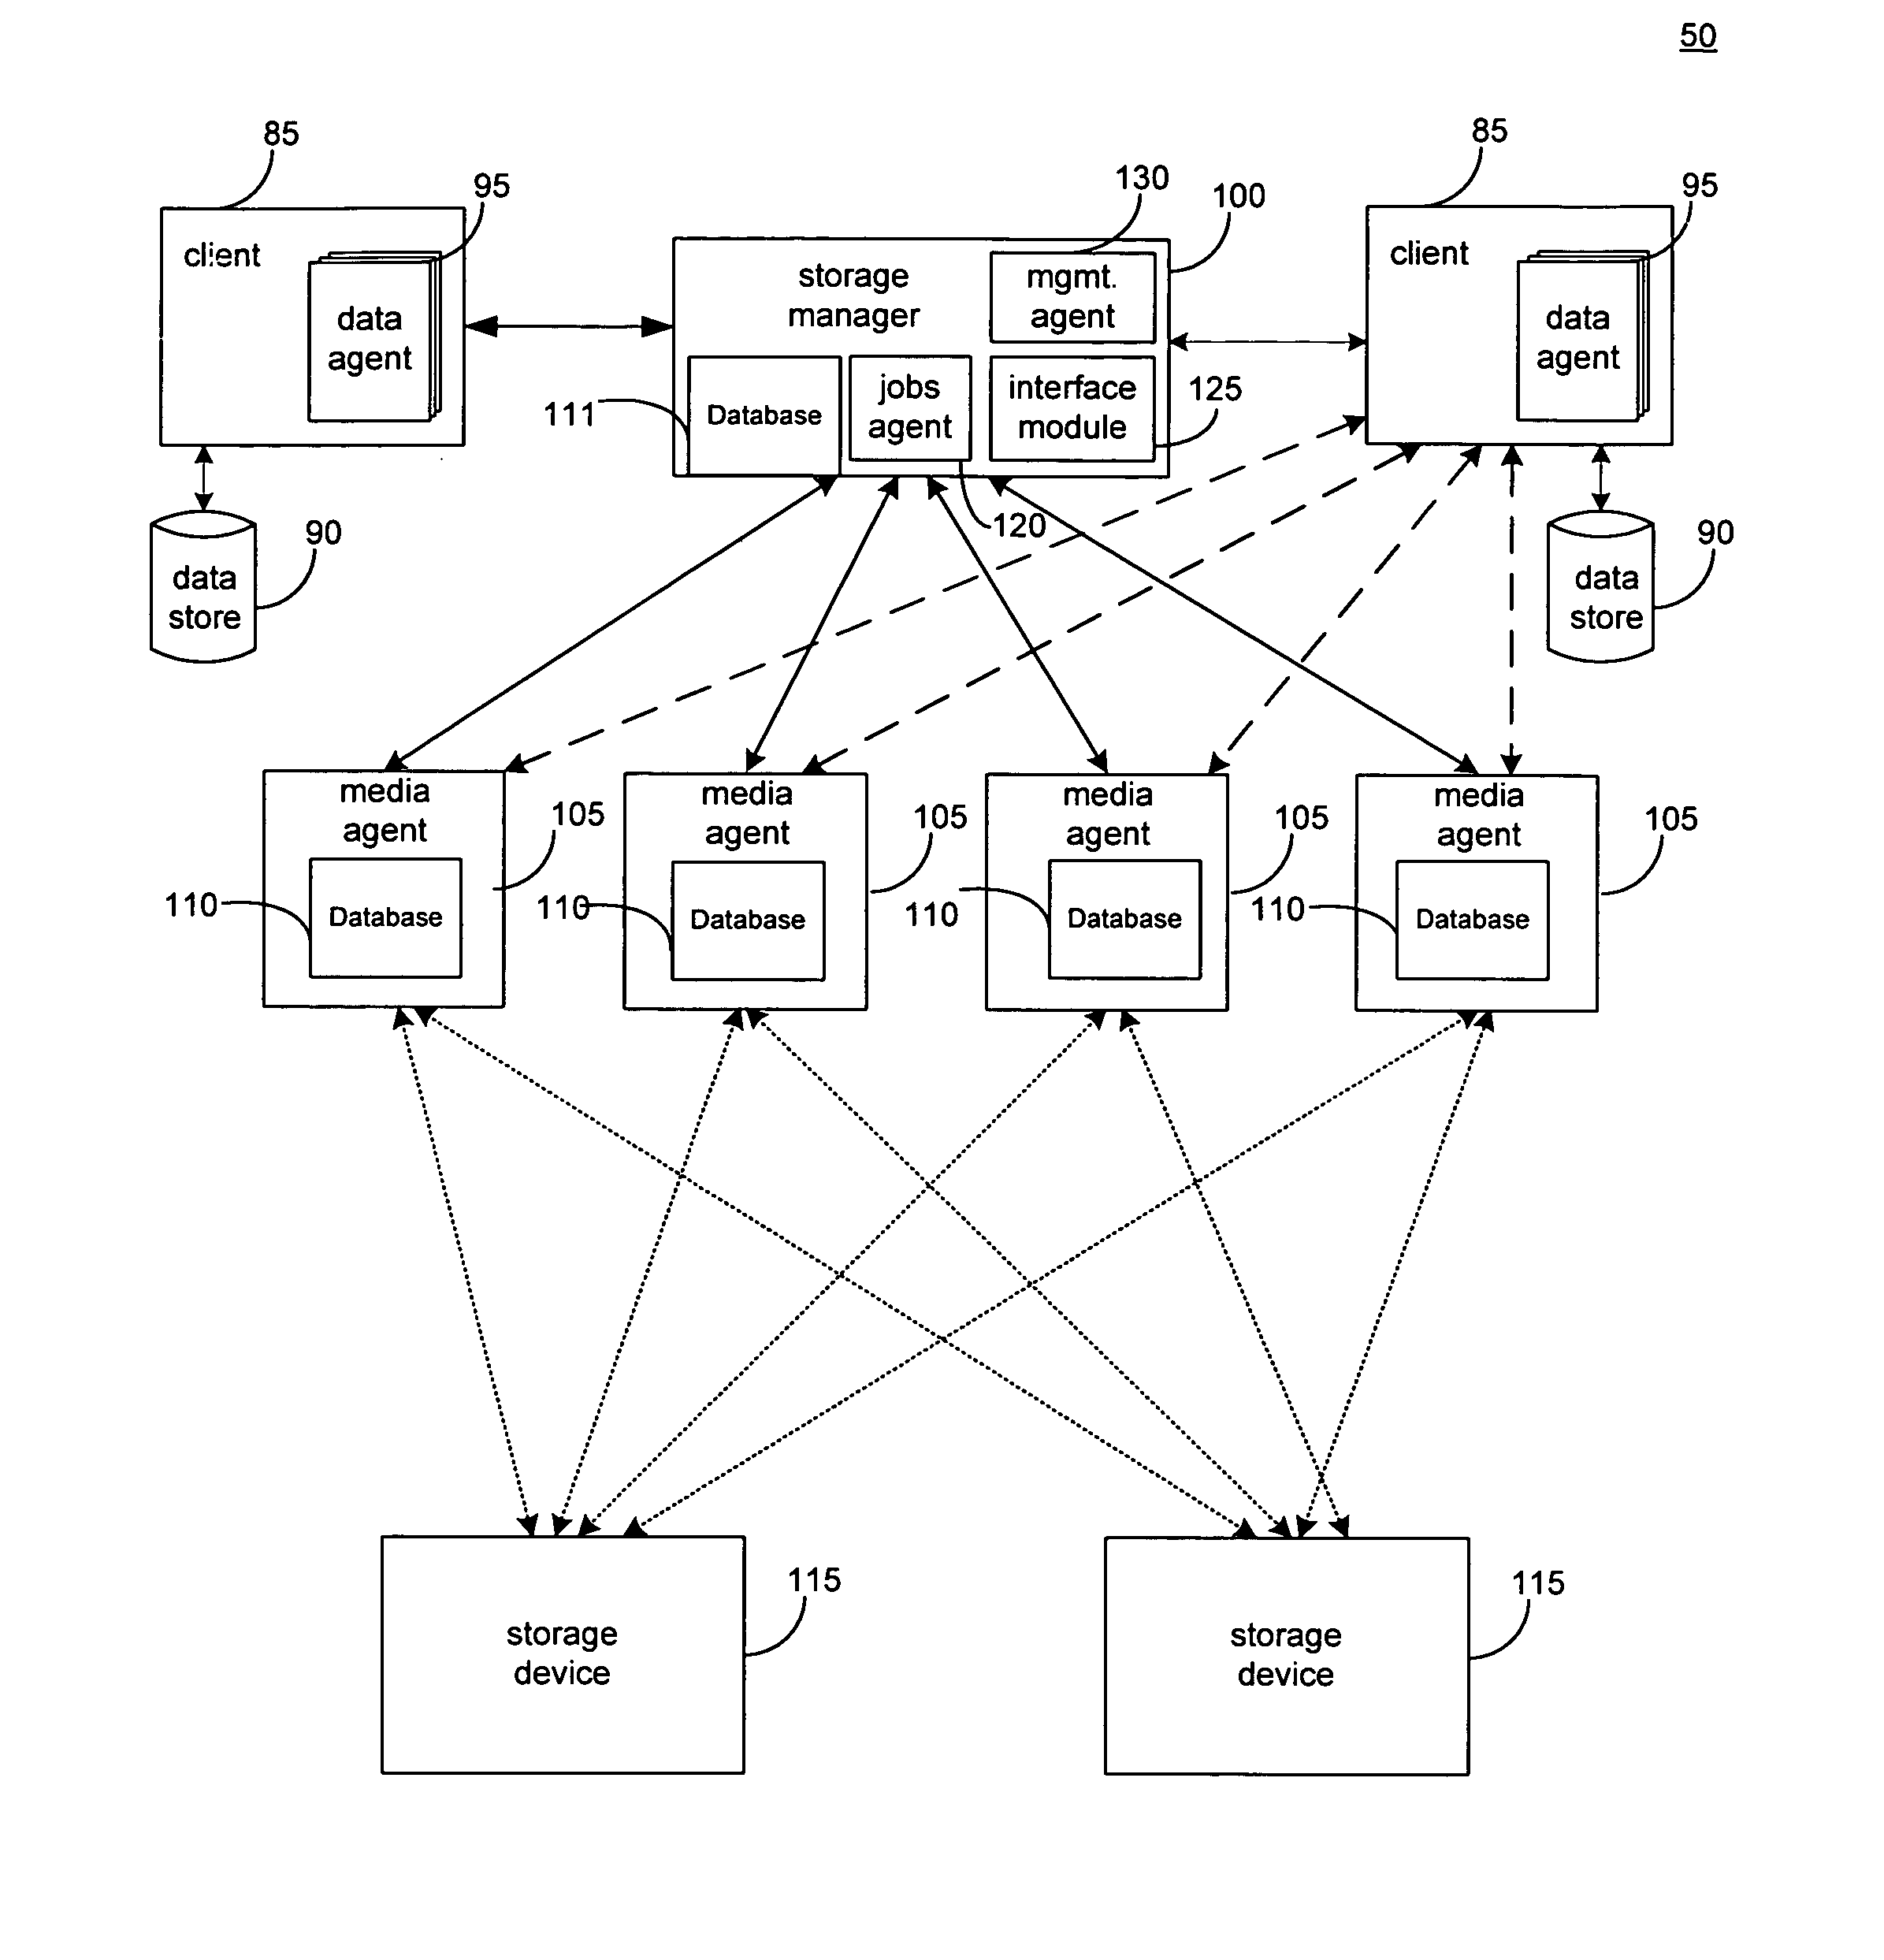 Hierarchical systems and methods for providing a unified view of storage information